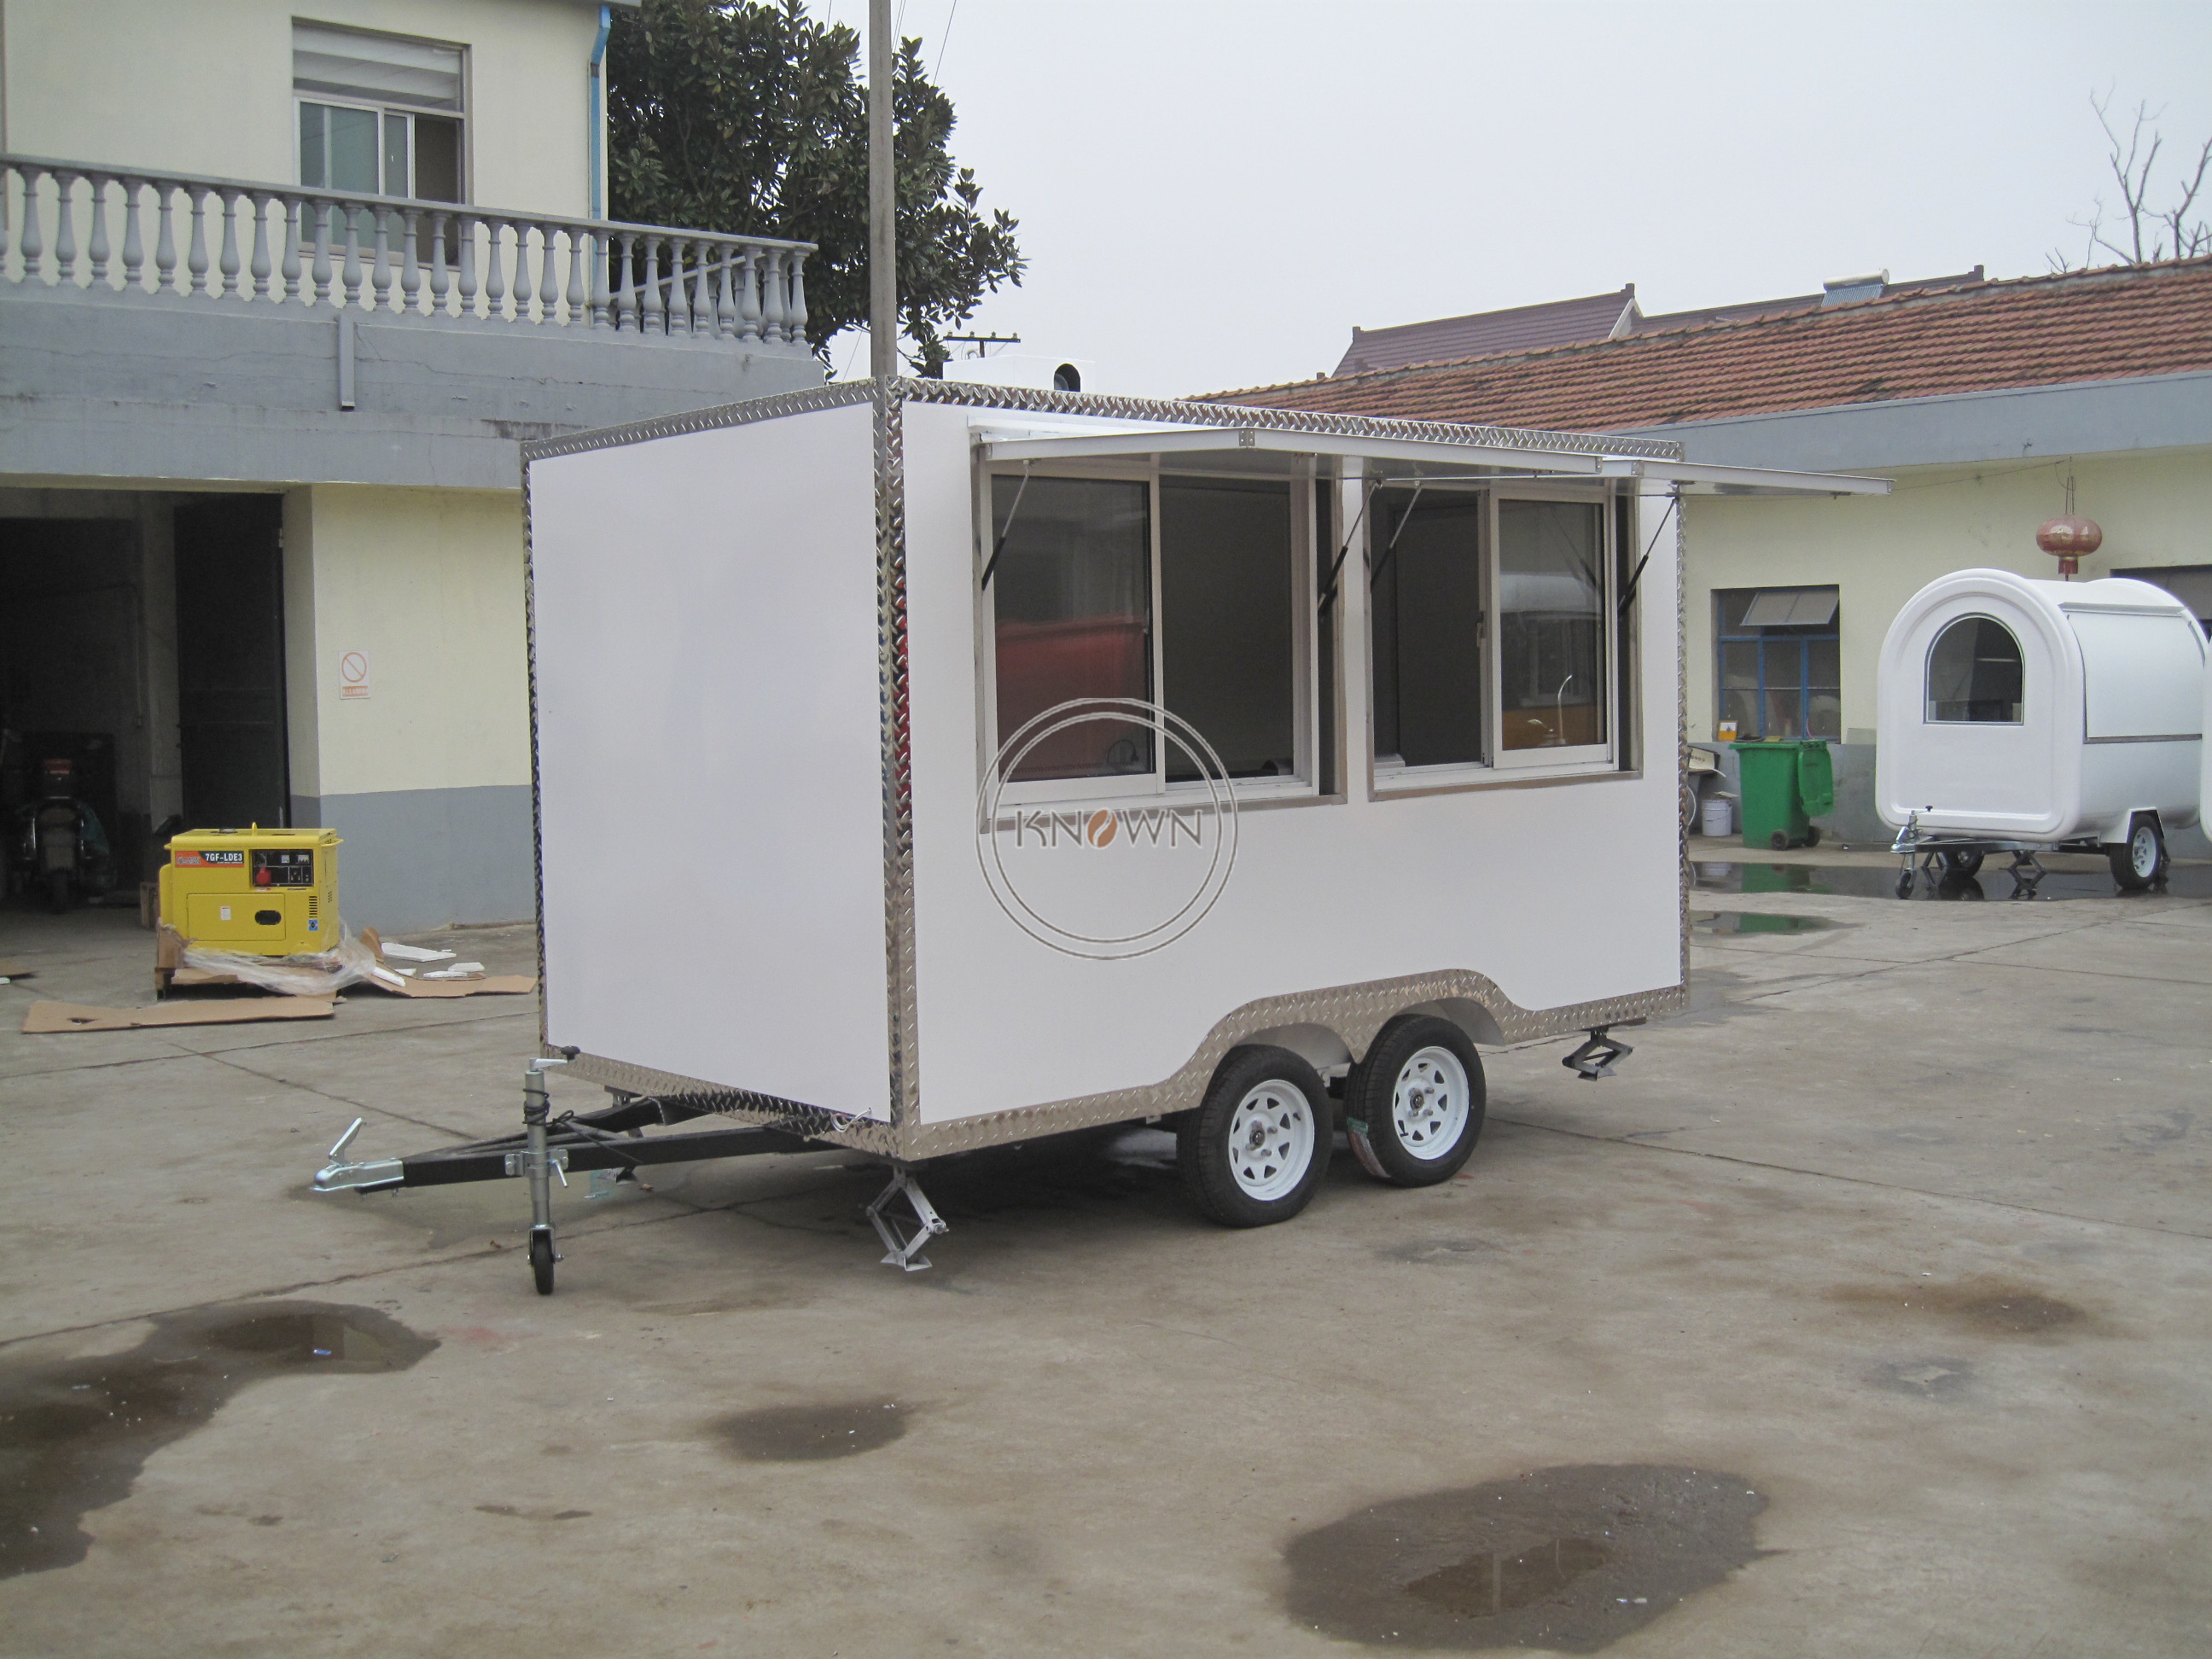 Customized 4000mm Mobile Fast Food Kiosk Catering Trailer for Fast Food Street Sale